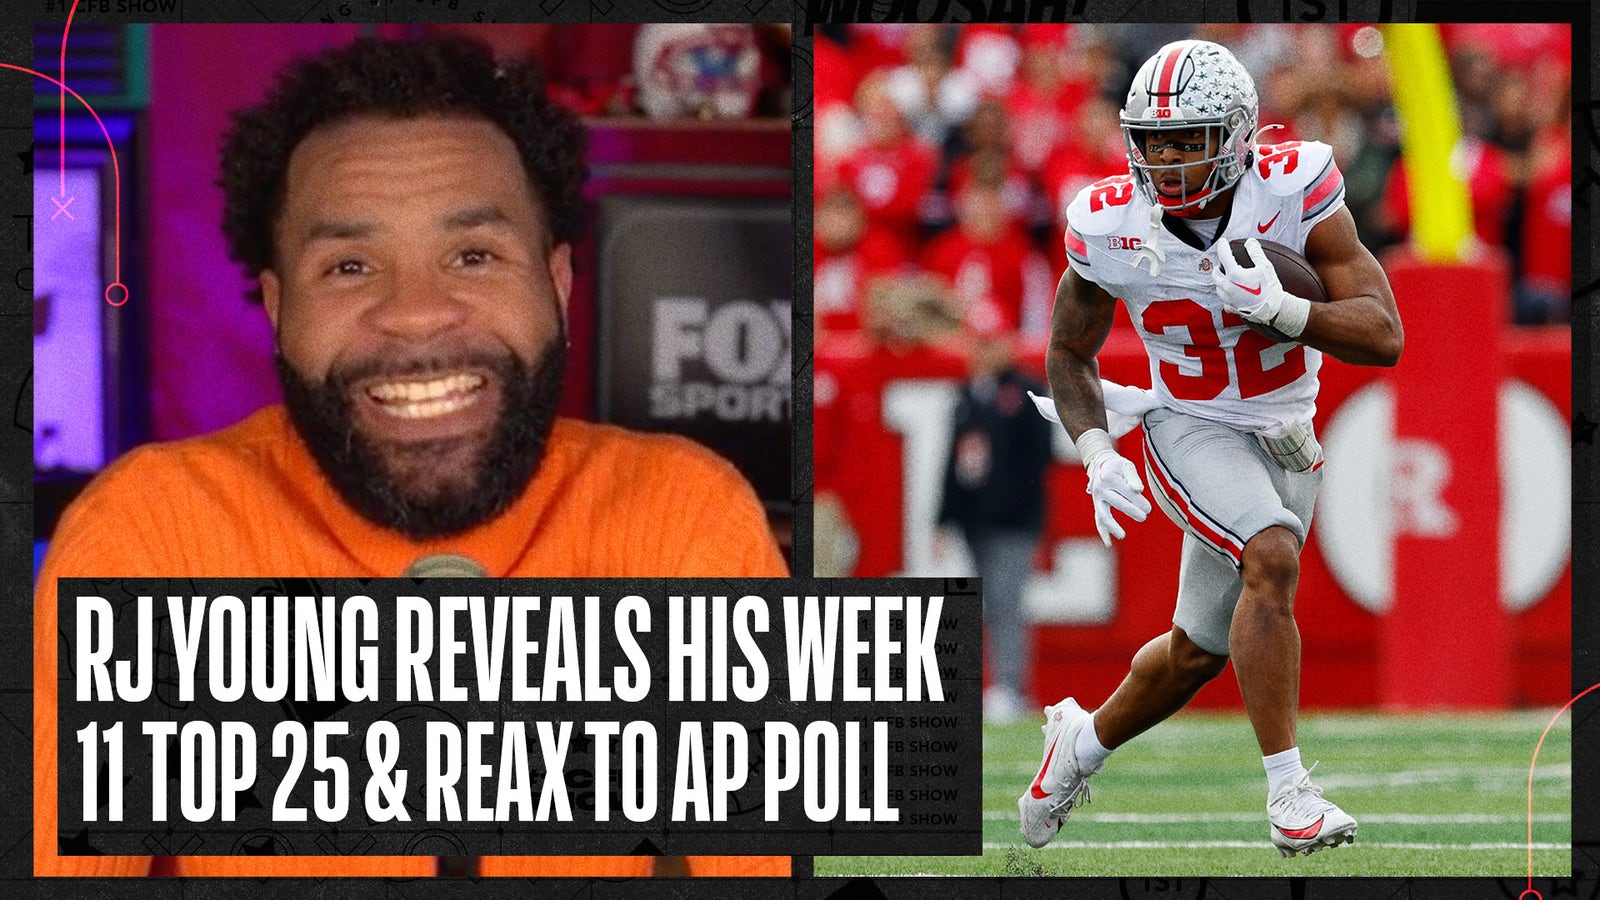 Reacting to the AP Top 25: What did the voters get wrong?